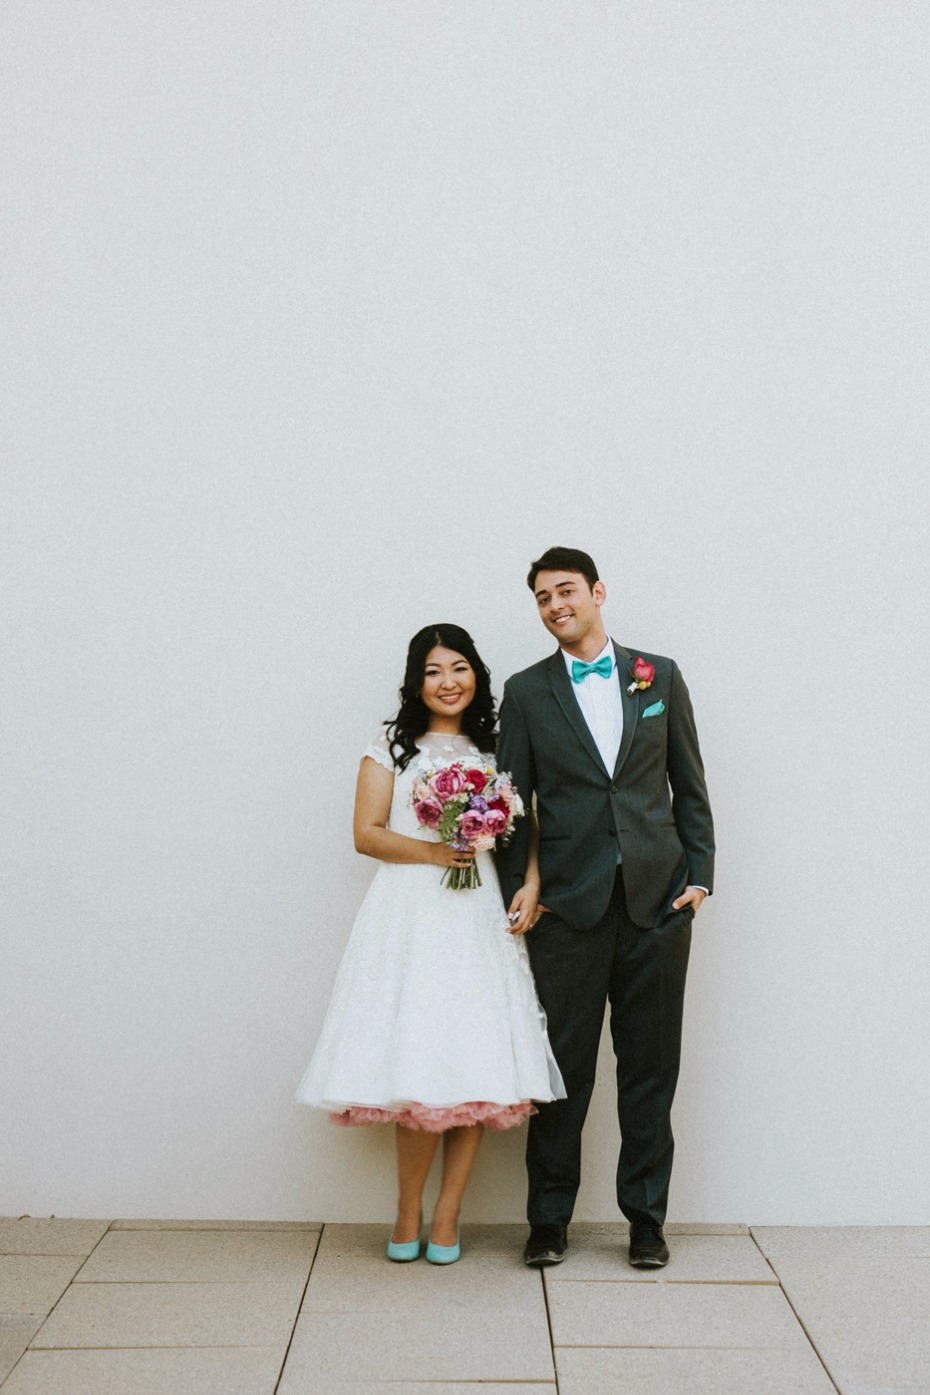 Cute and colorful wedding